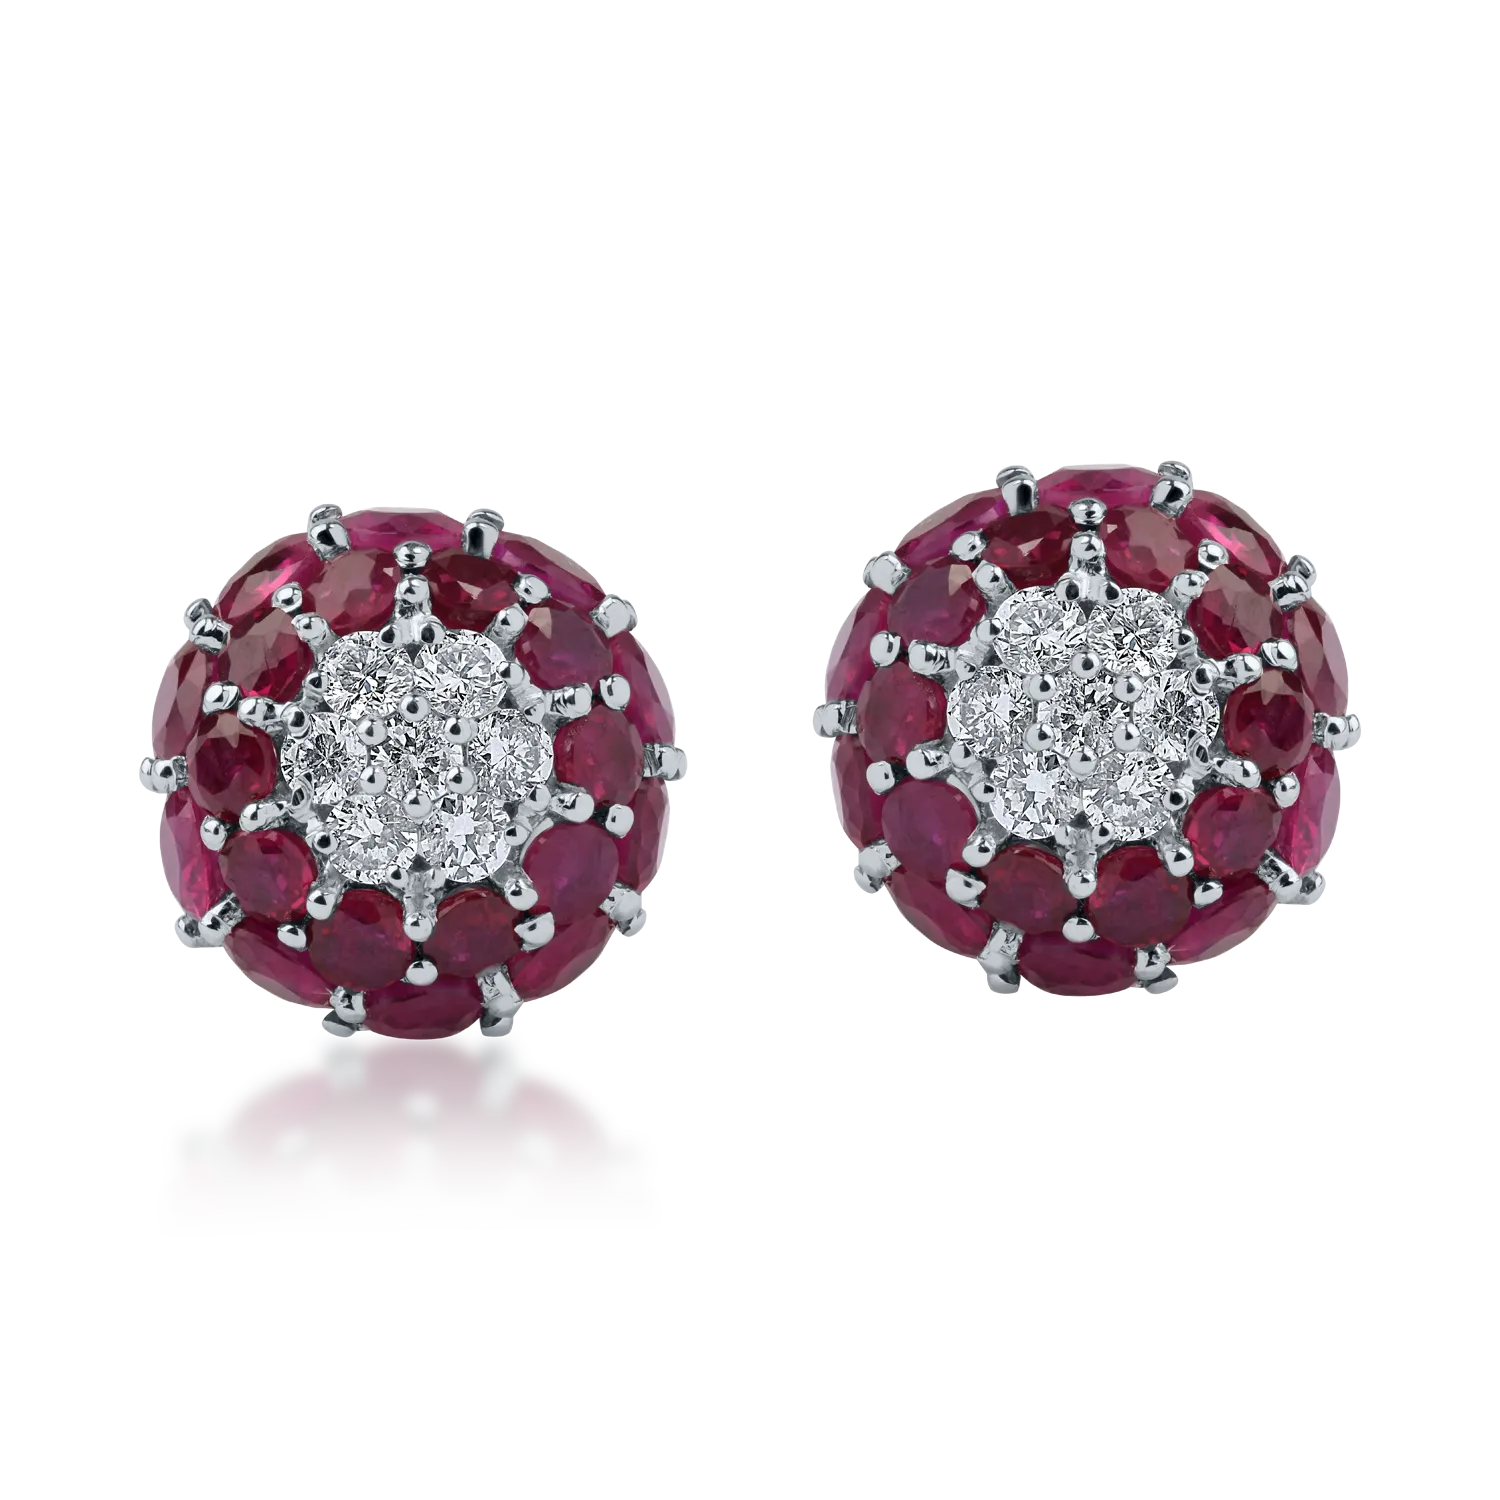 White gold earrings with 3.43ct rubies and 0.31ct diamonds